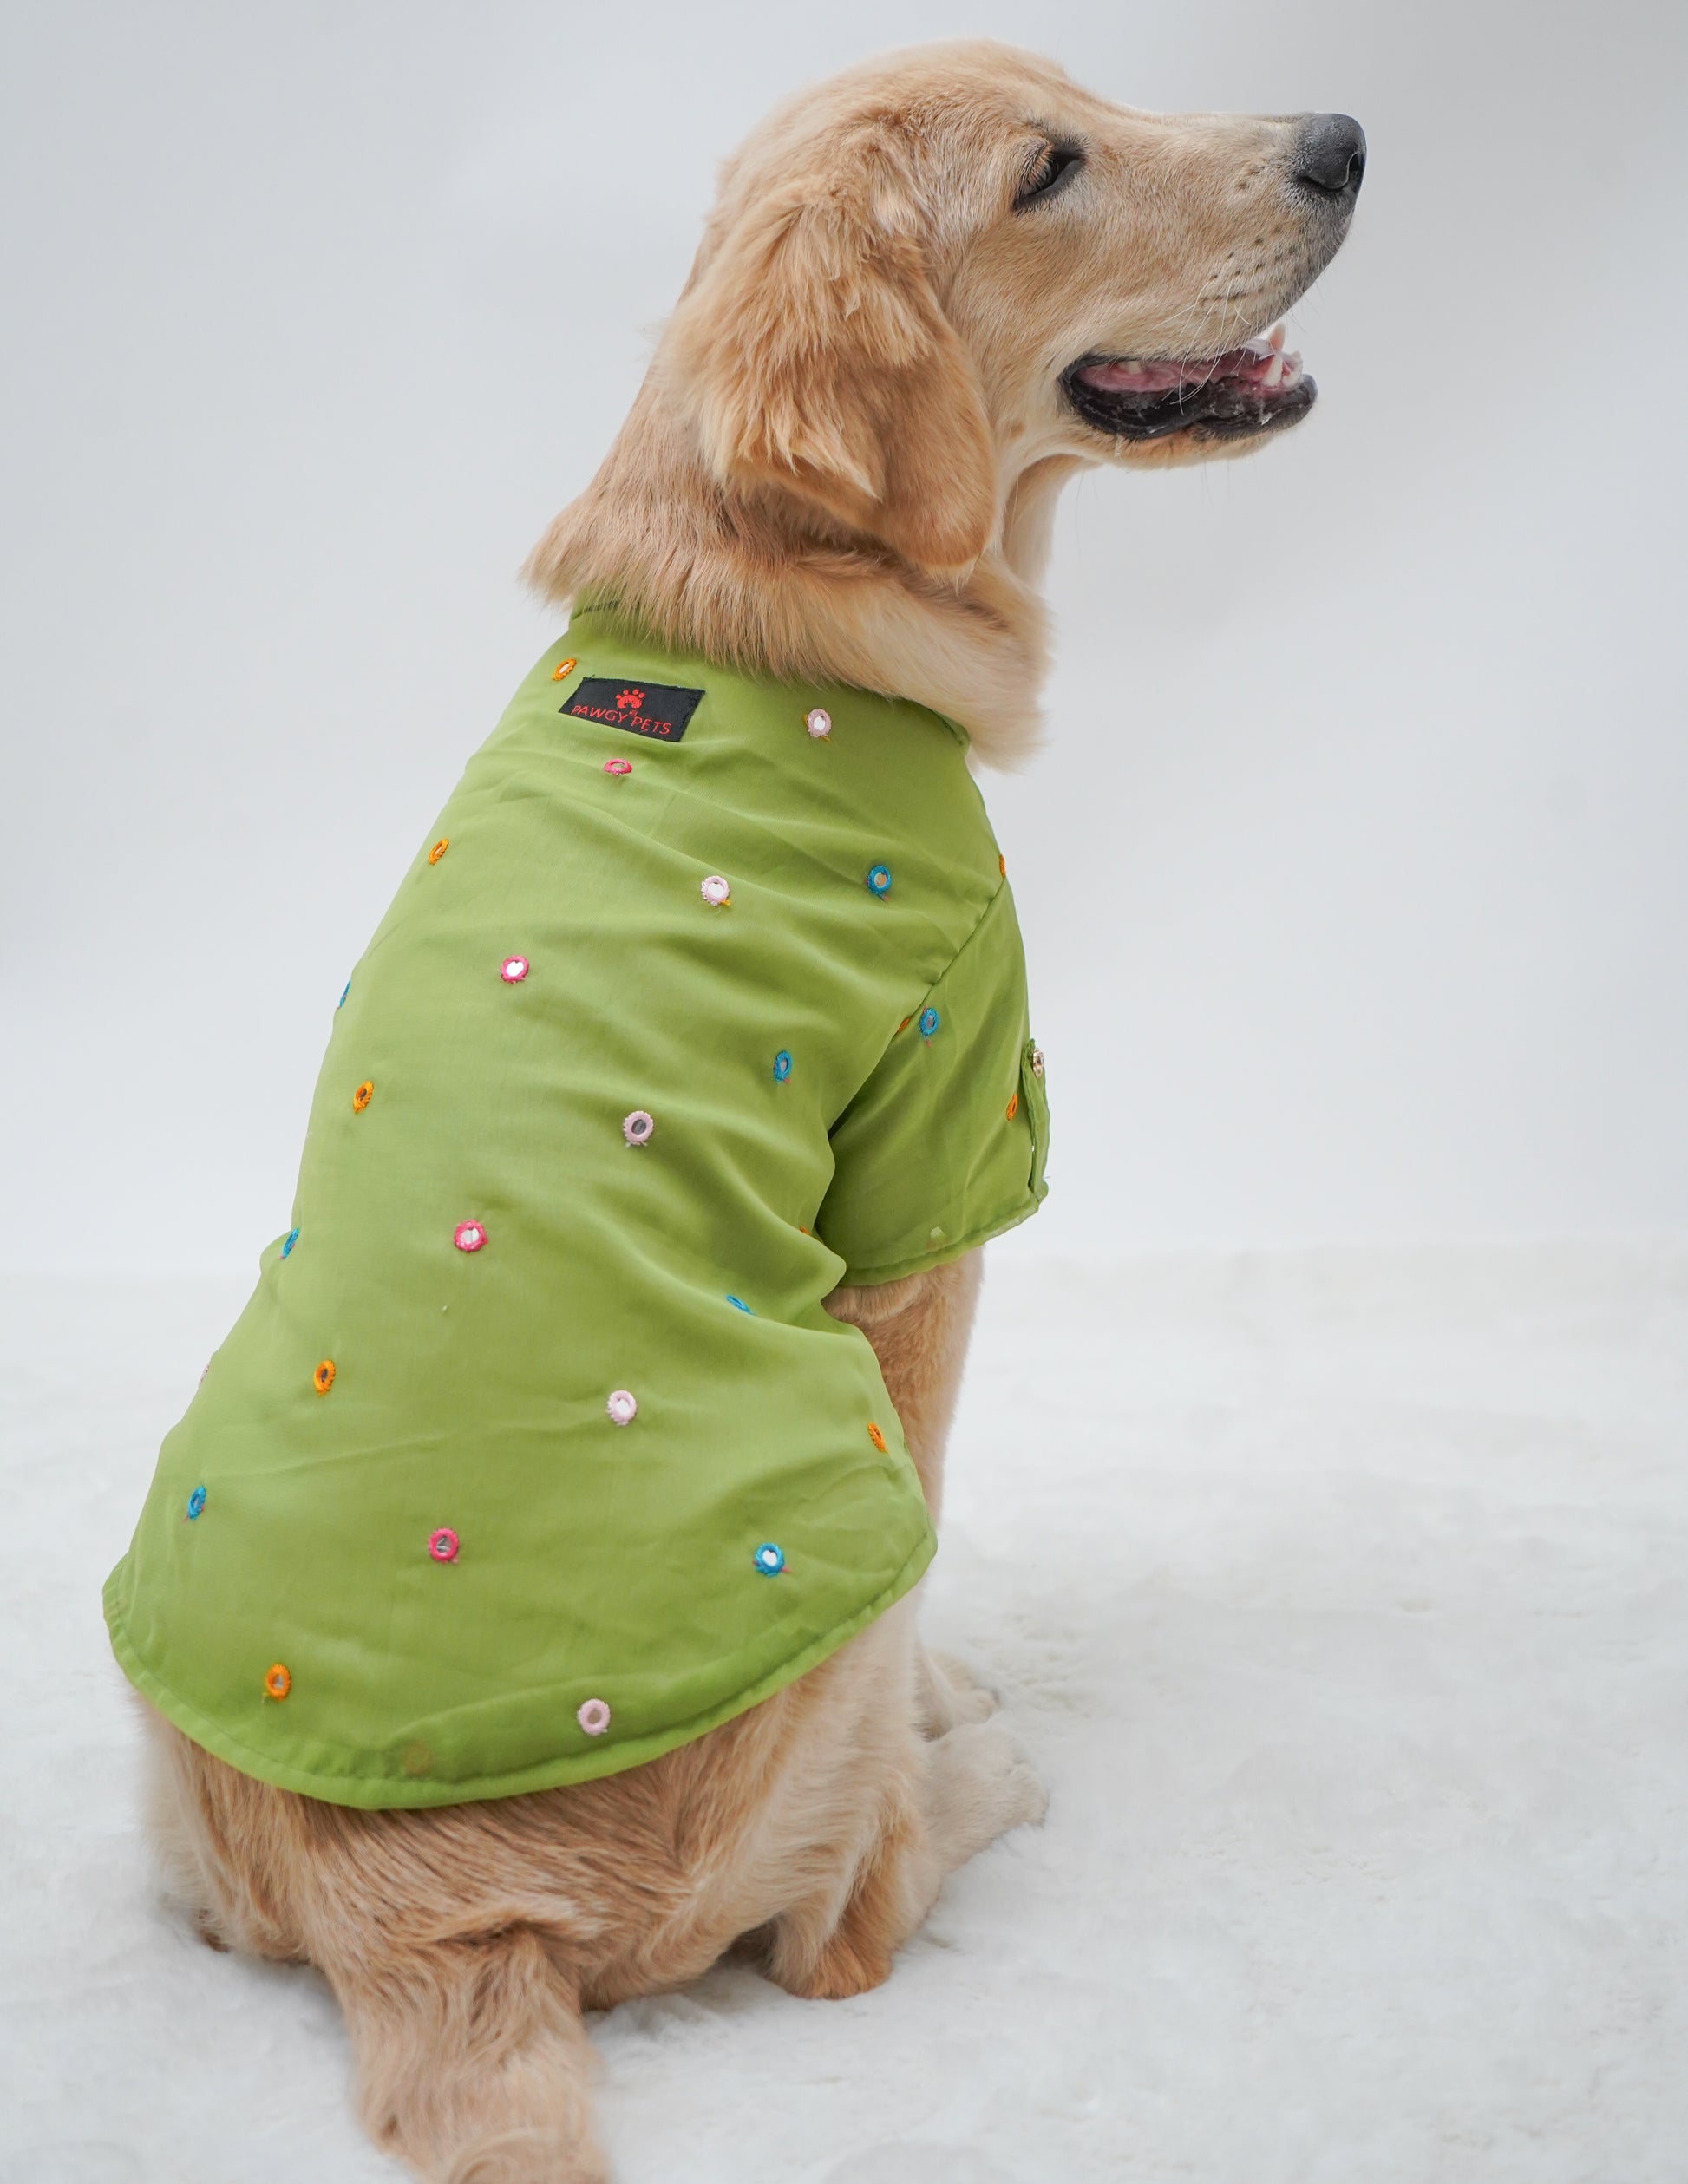 Pawgy Pets Festive Shirt Pista Green for Dogs